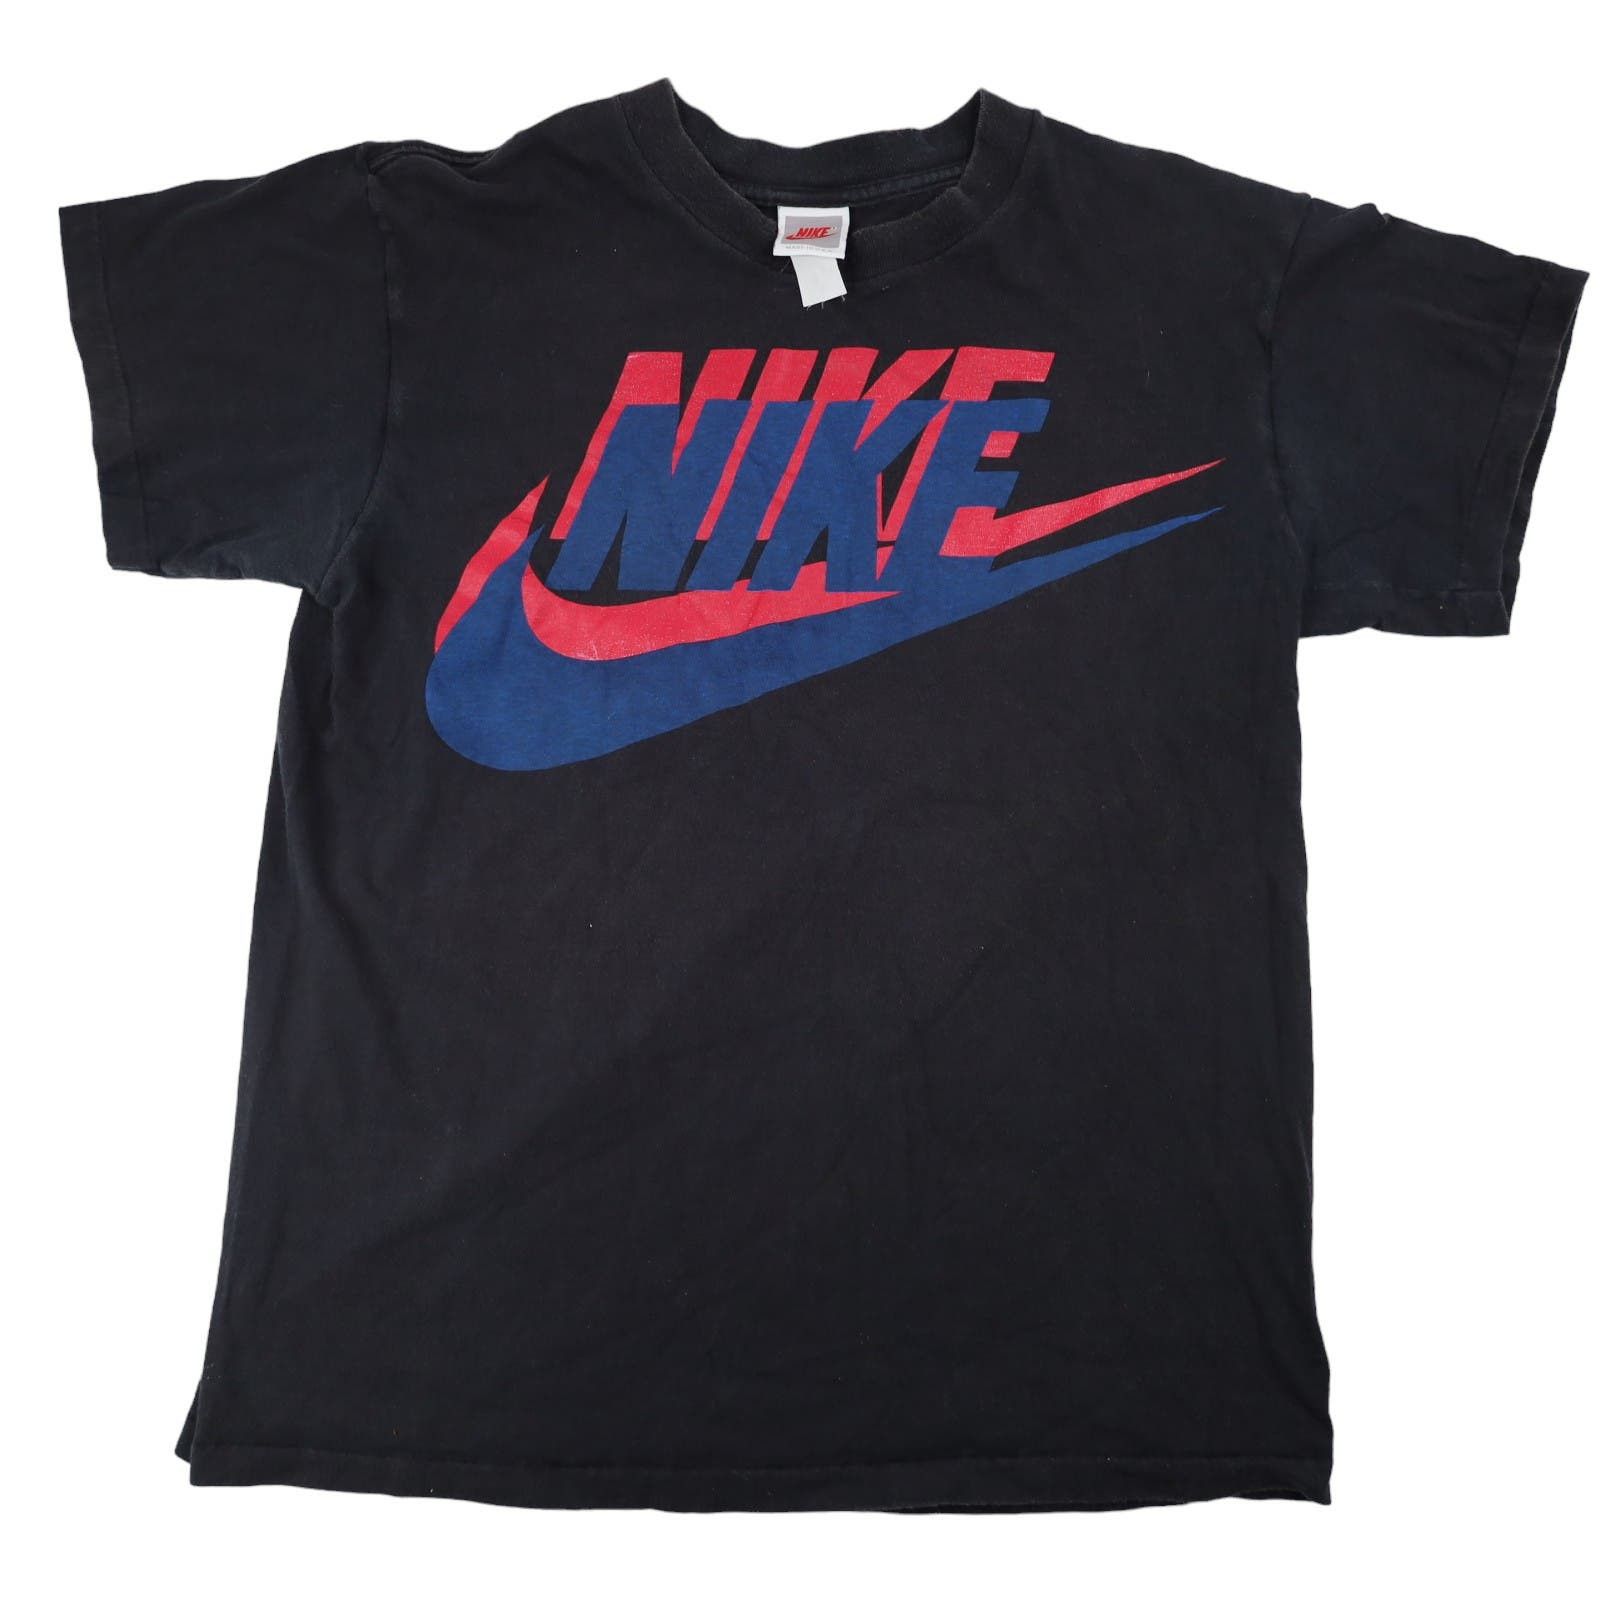 Nike Vintage 90s Nike Graphic Spellout T Shirt Size US L / EU 52-54 / 3 - 1 Preview